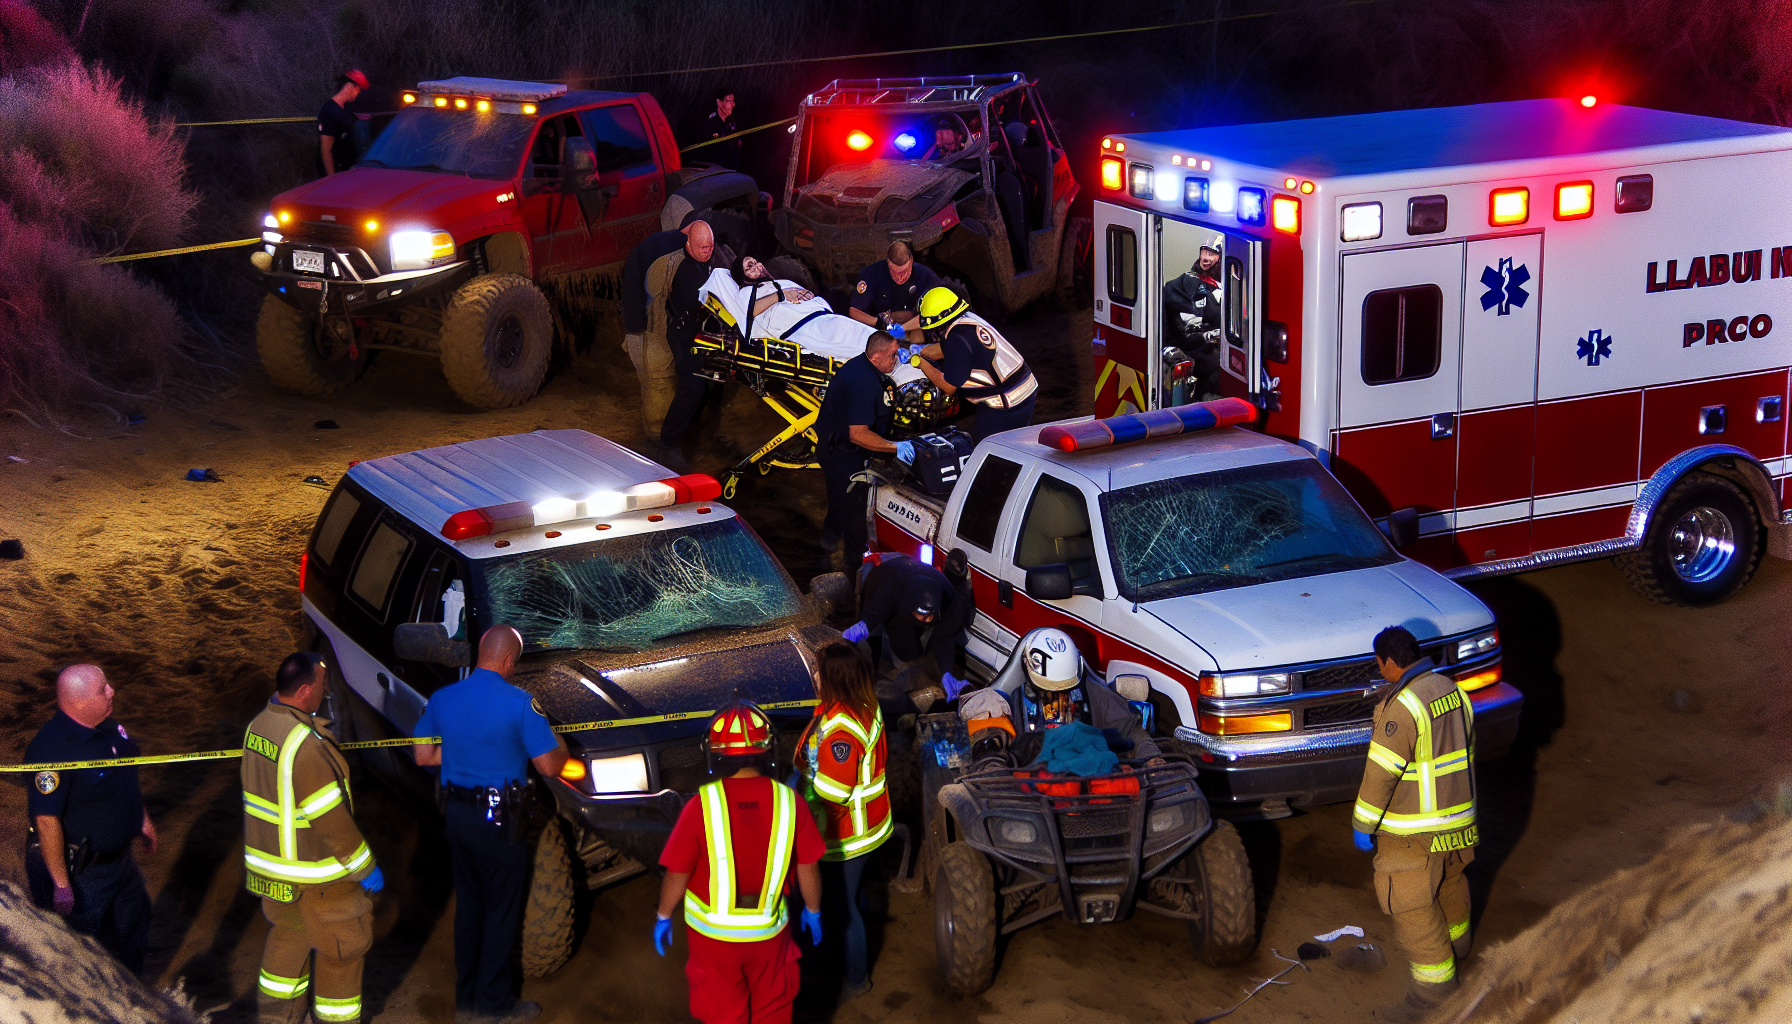 Emergency services arriving at the scene of an ATV accident